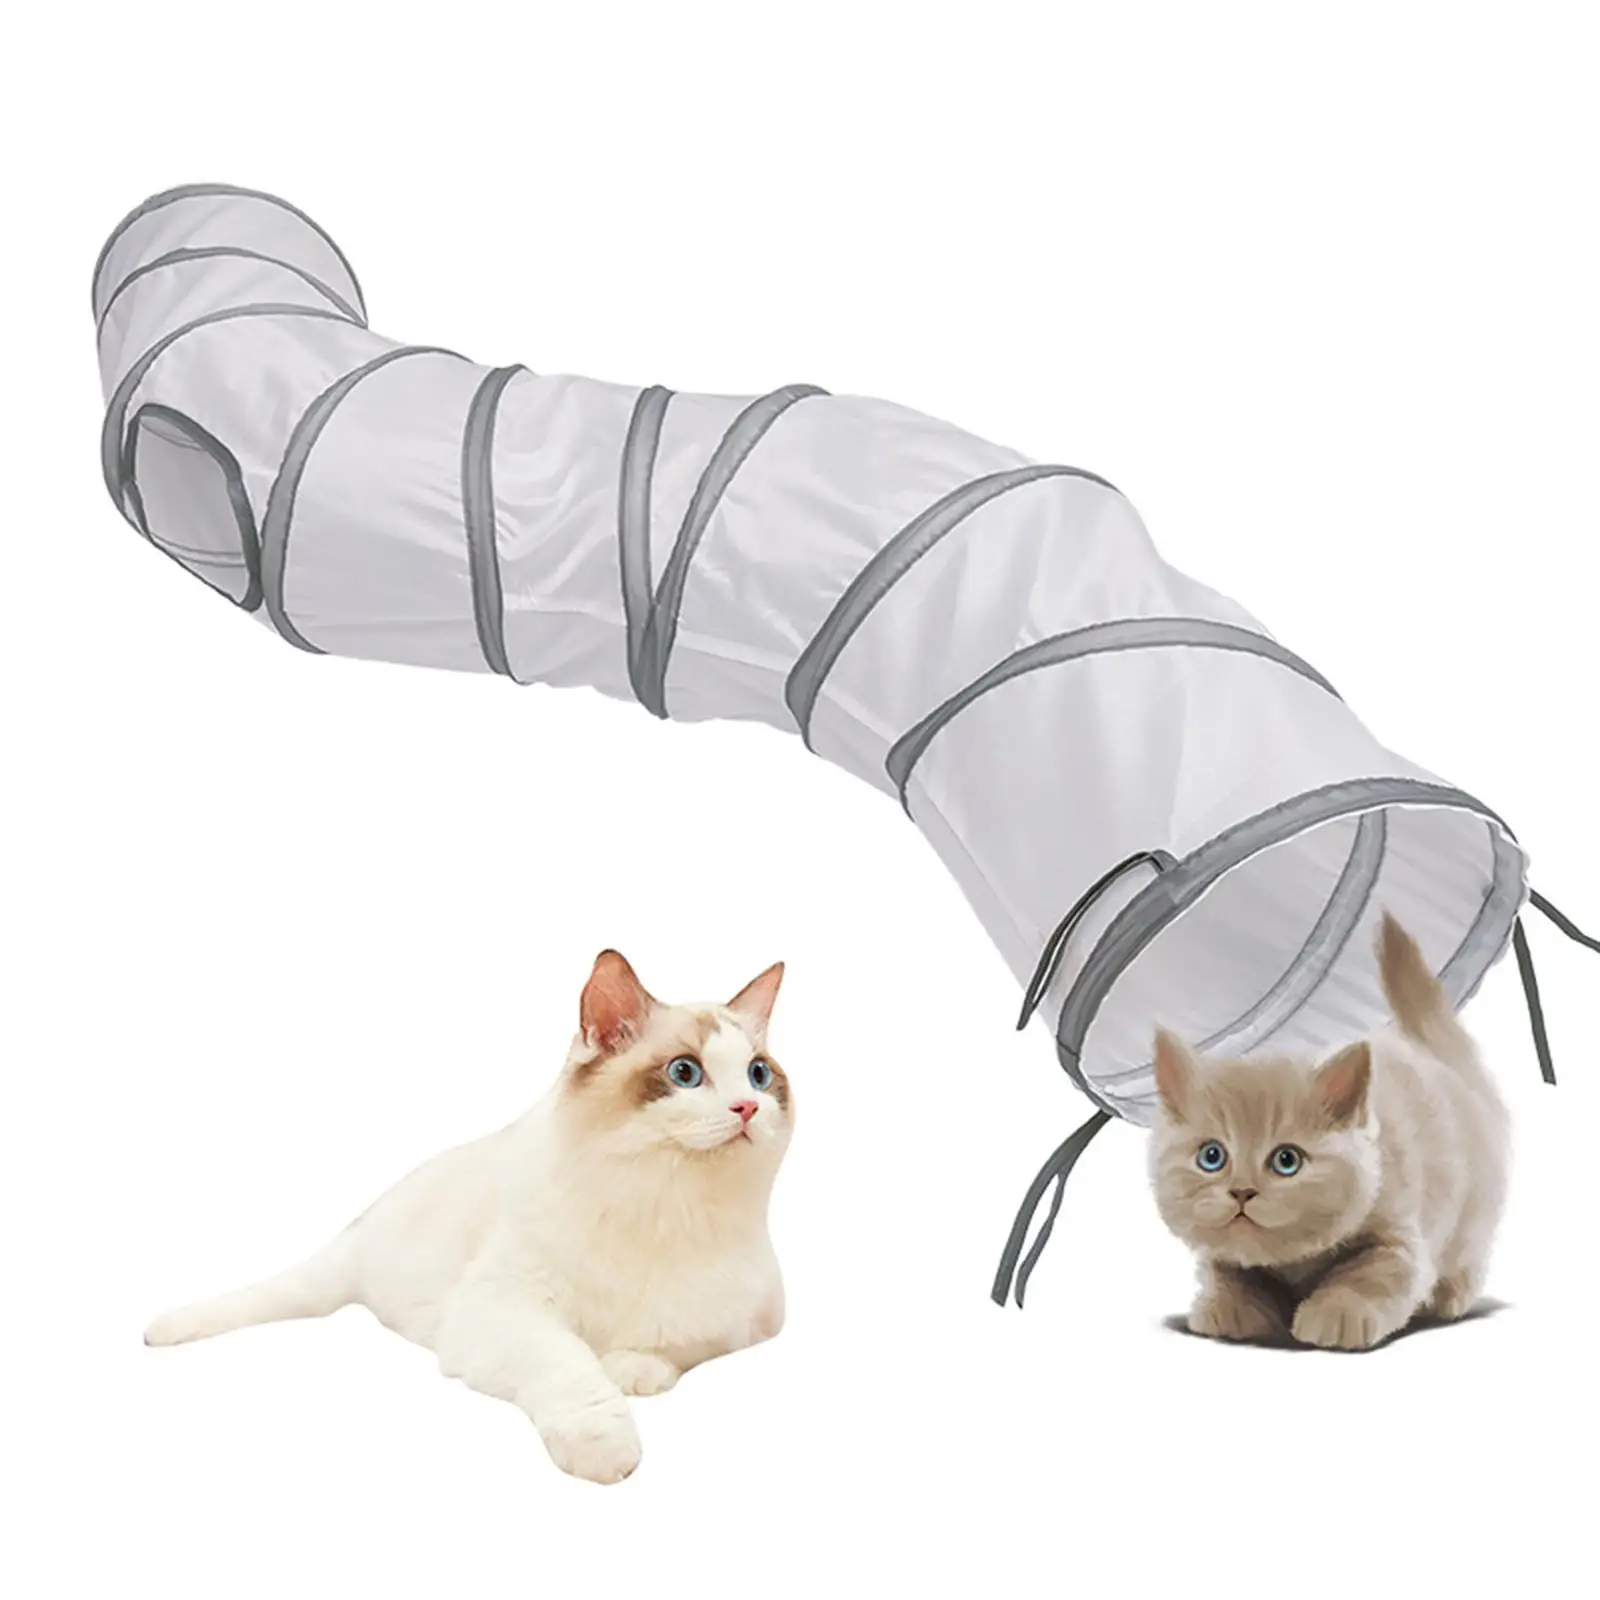 Folding Cat Tunnel Tube Interactive Toy Durable Practical for Hiding